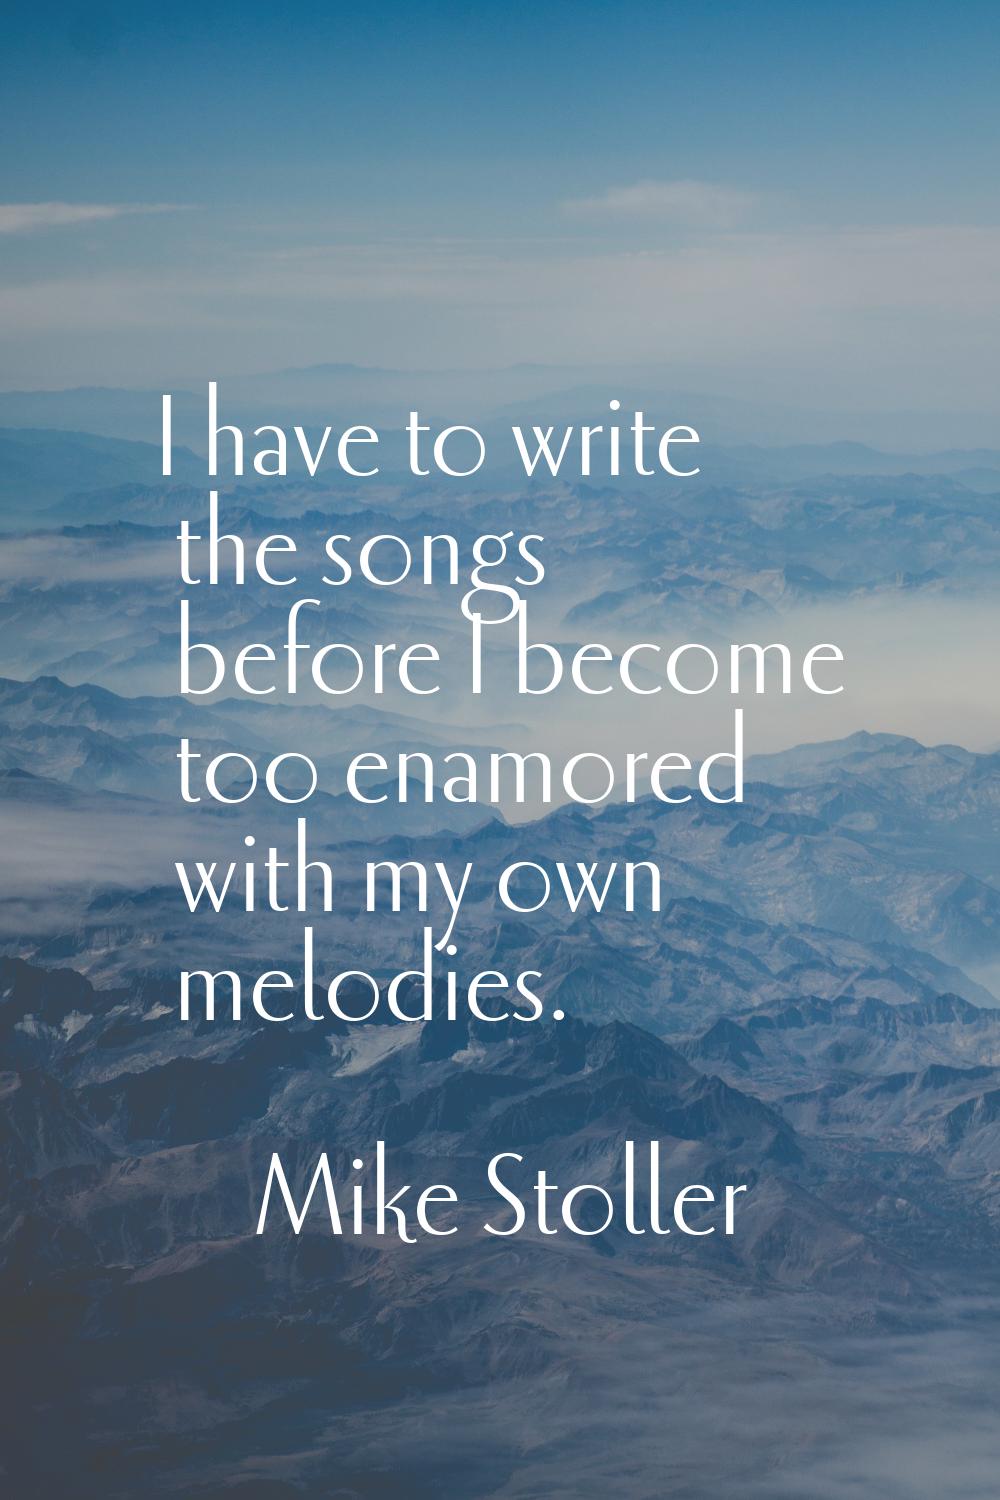 I have to write the songs before I become too enamored with my own melodies.